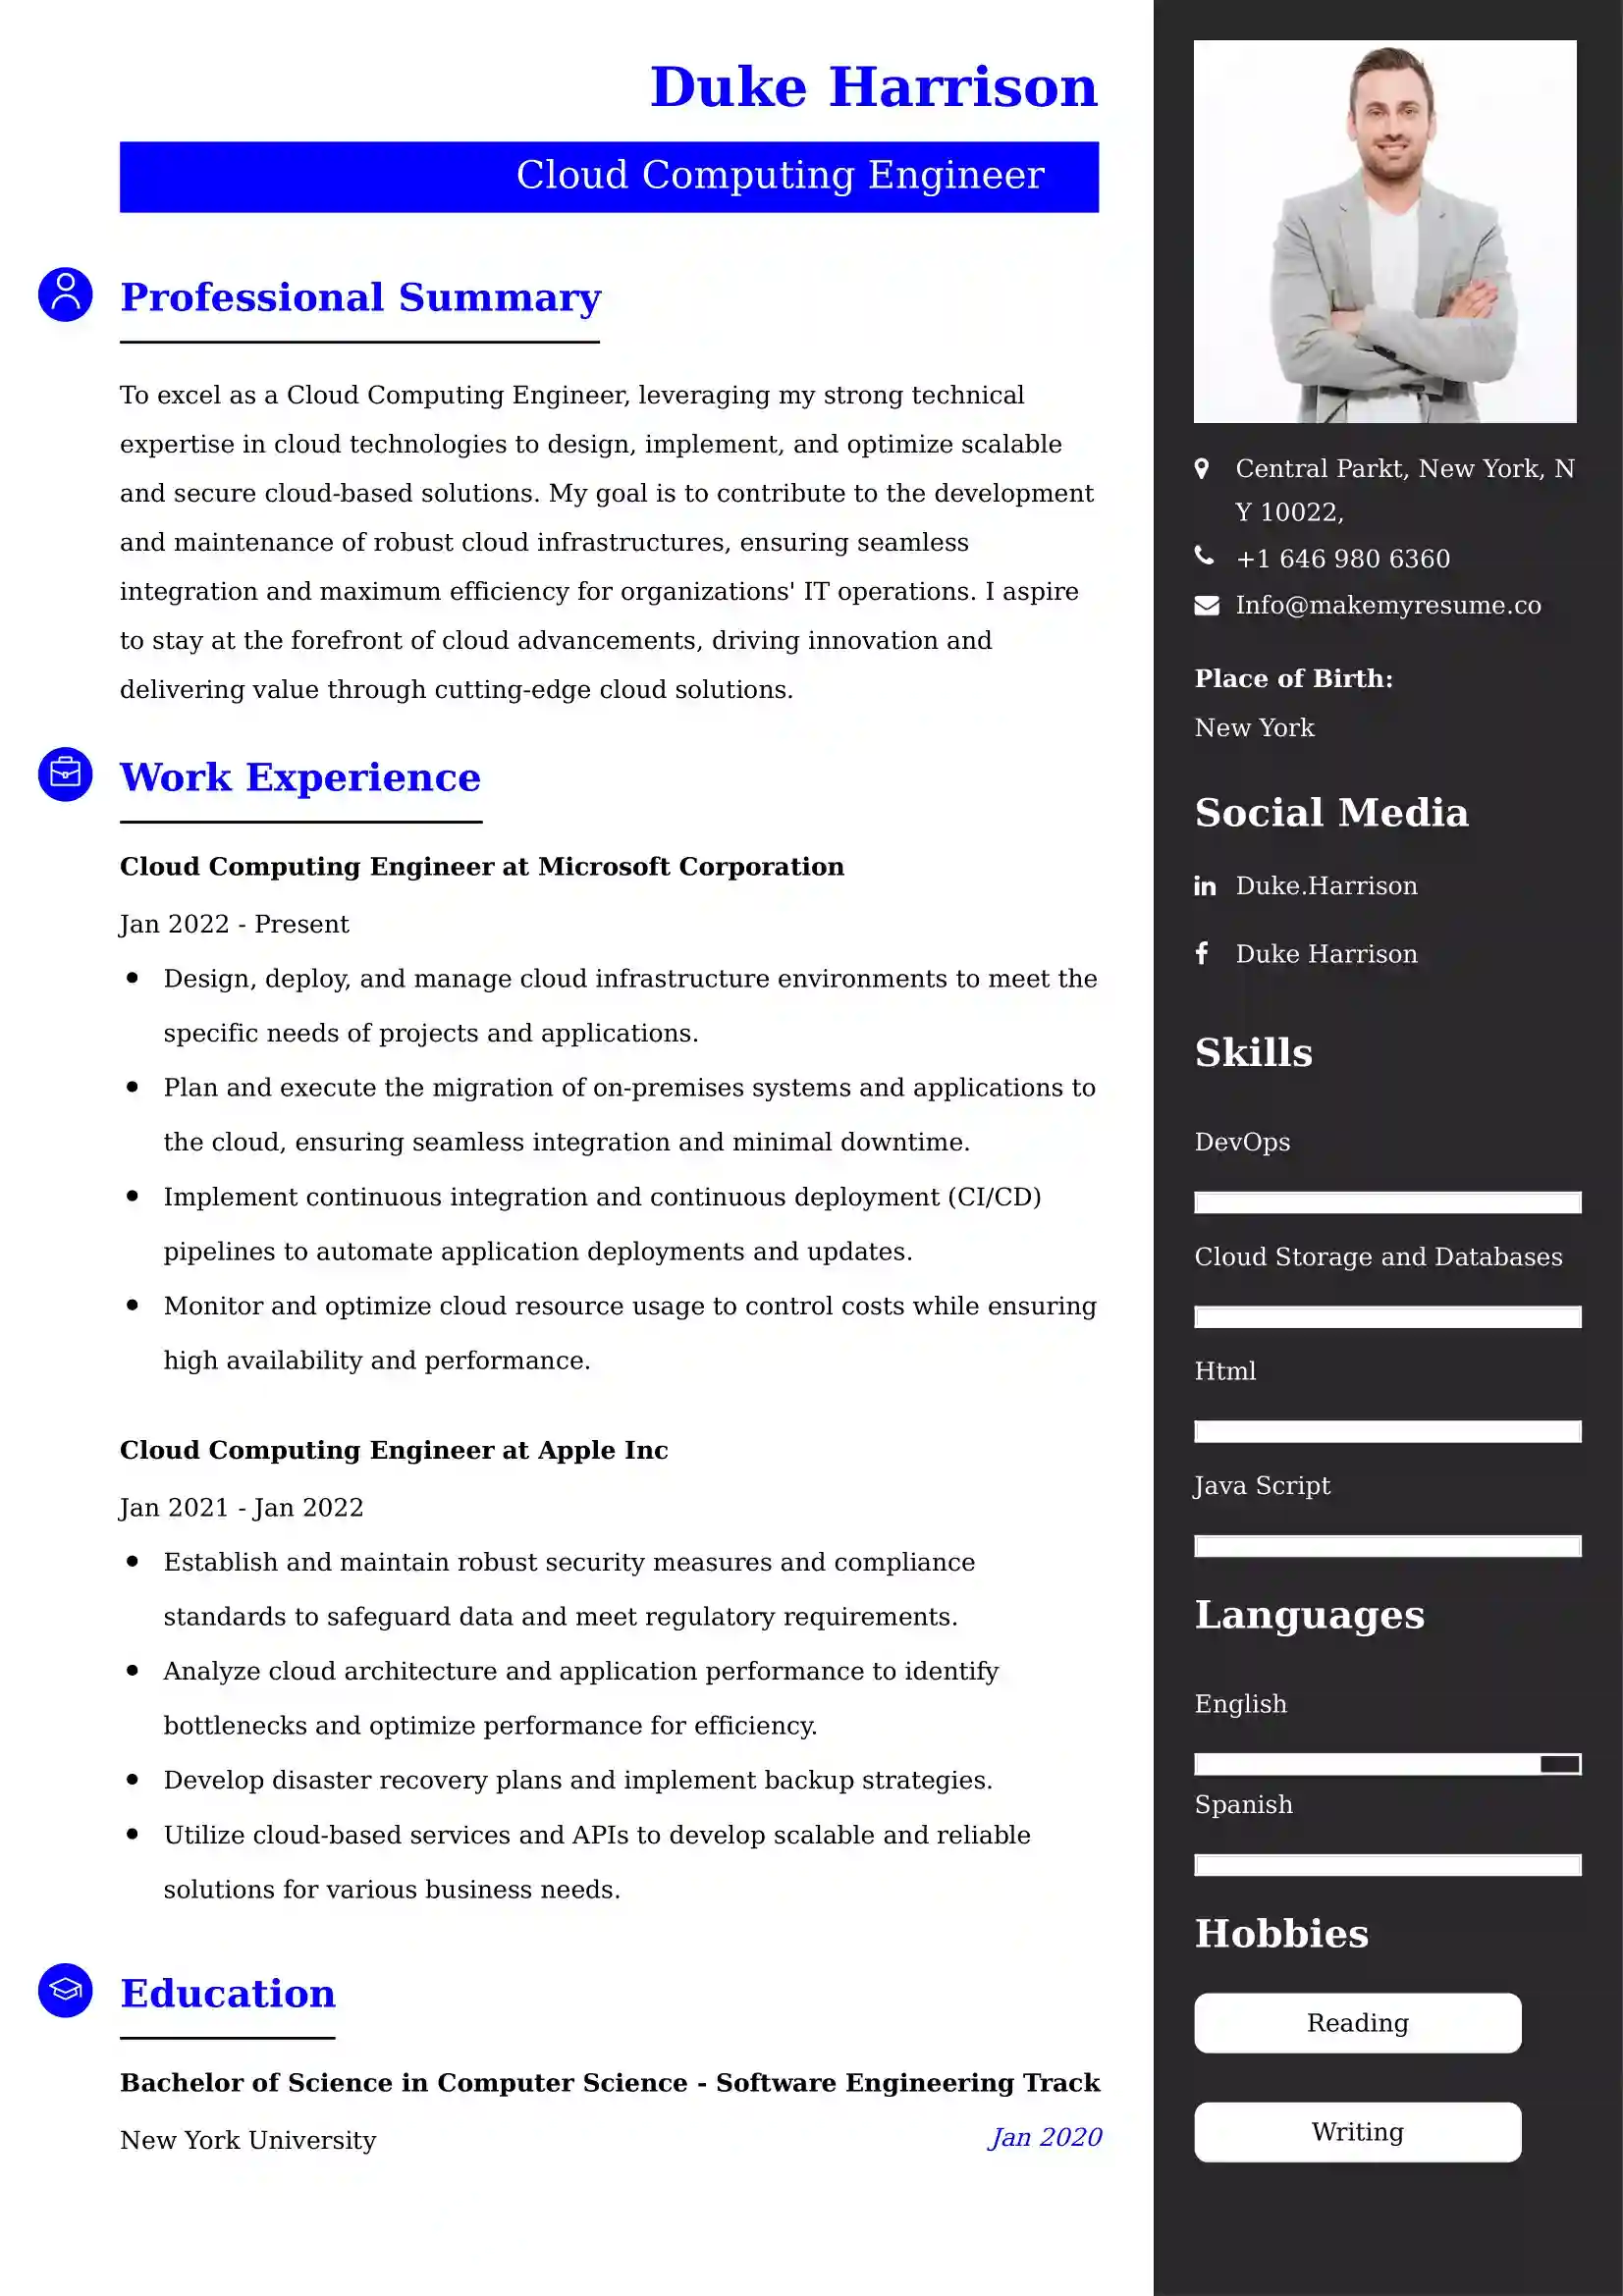 60+ Professional Computers & Software Resume Examples, Latest Format